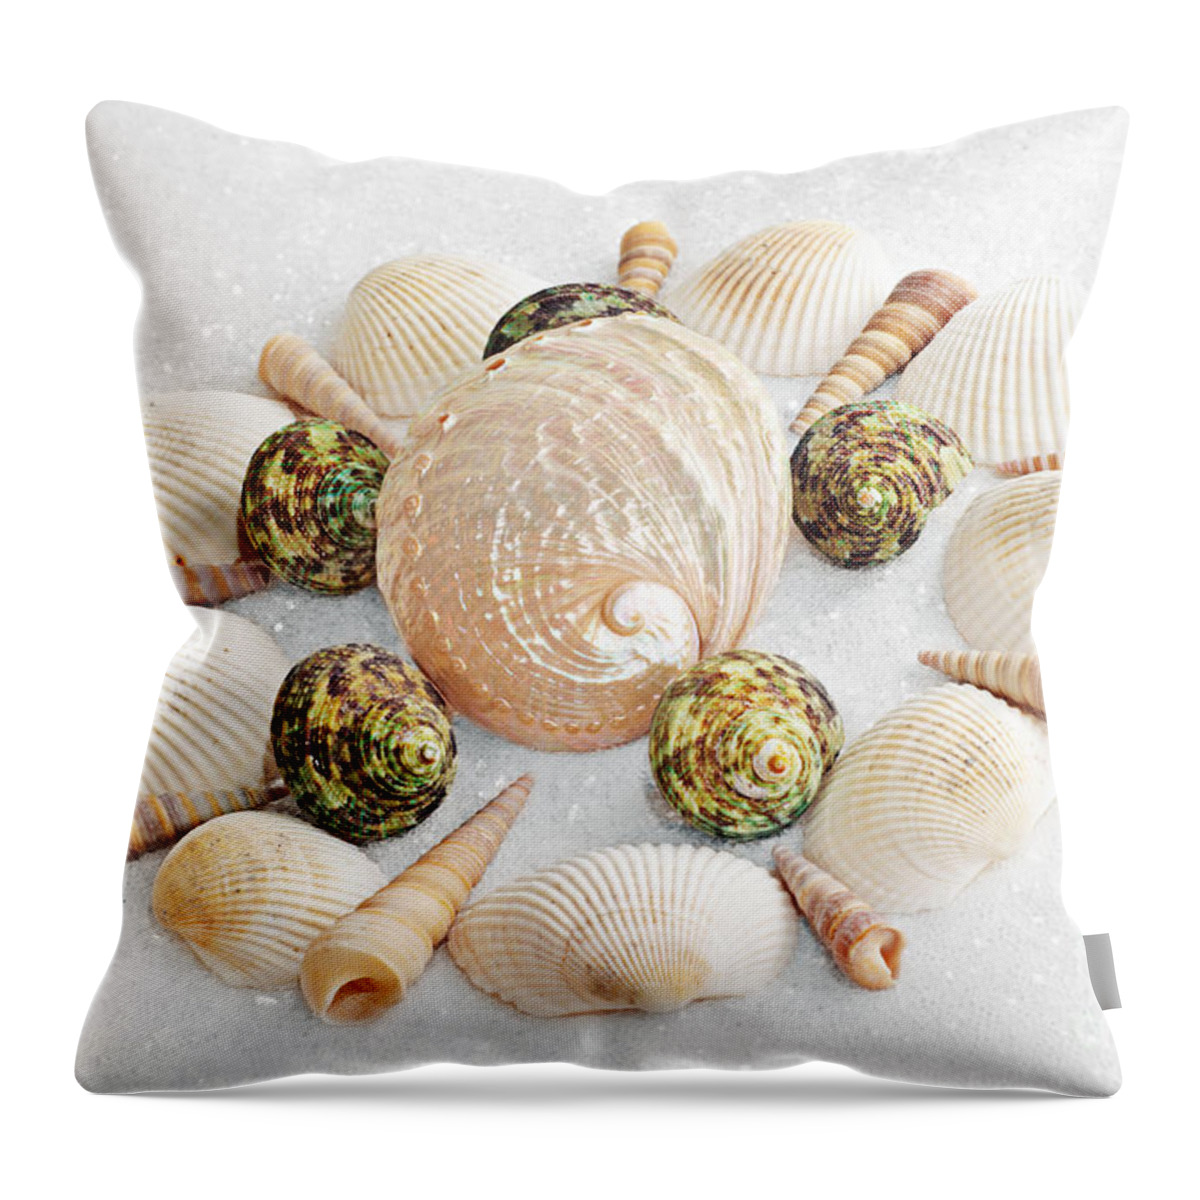 Seashells Throw Pillow featuring the photograph North Carolina Circle Of Sea Shells by Andee Design